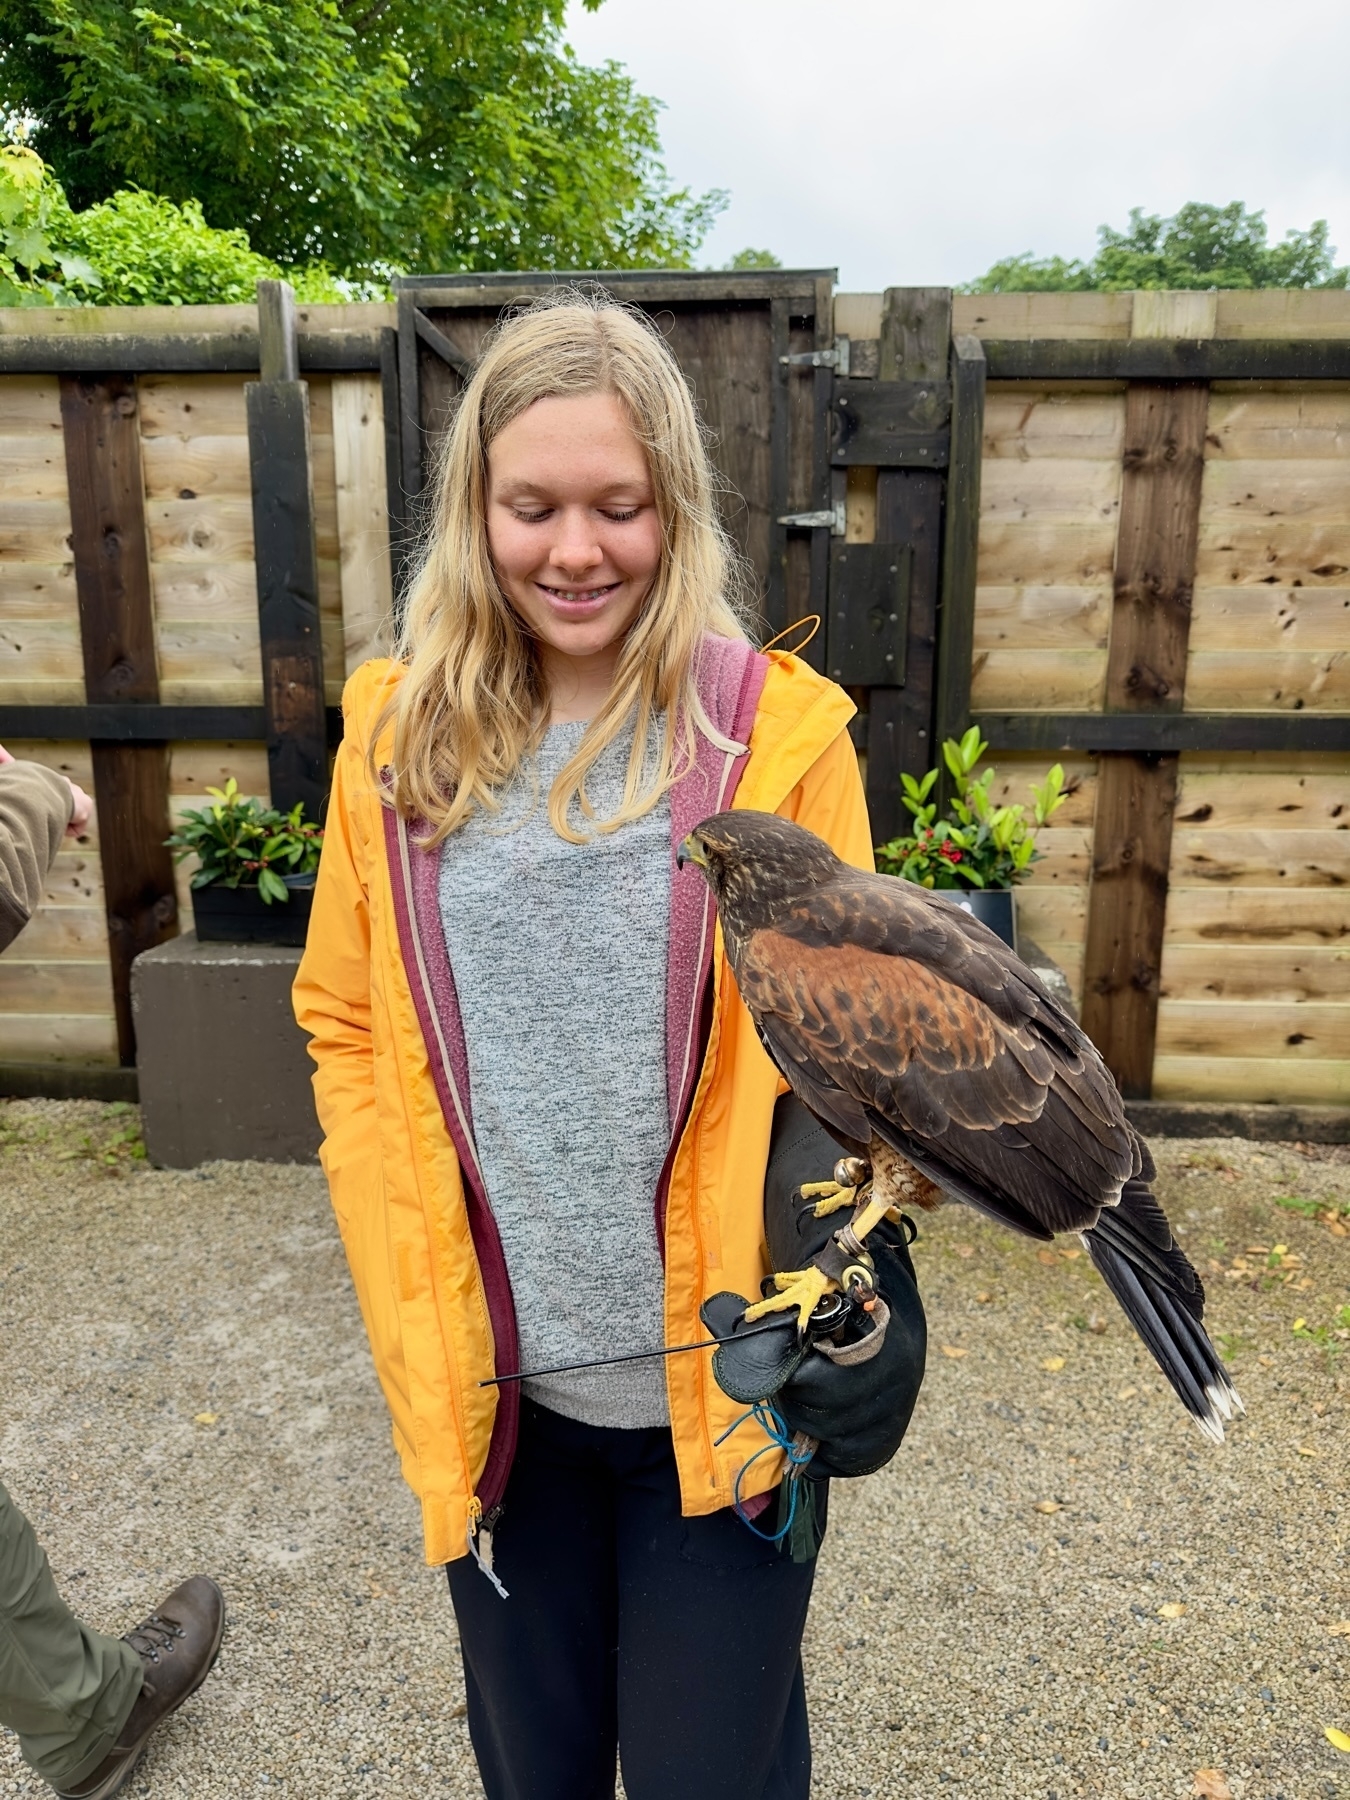 Auto-generated description: A girl wearing a yellow jacket is holding a bird of prey on her gloved hand in an outdoor setting.